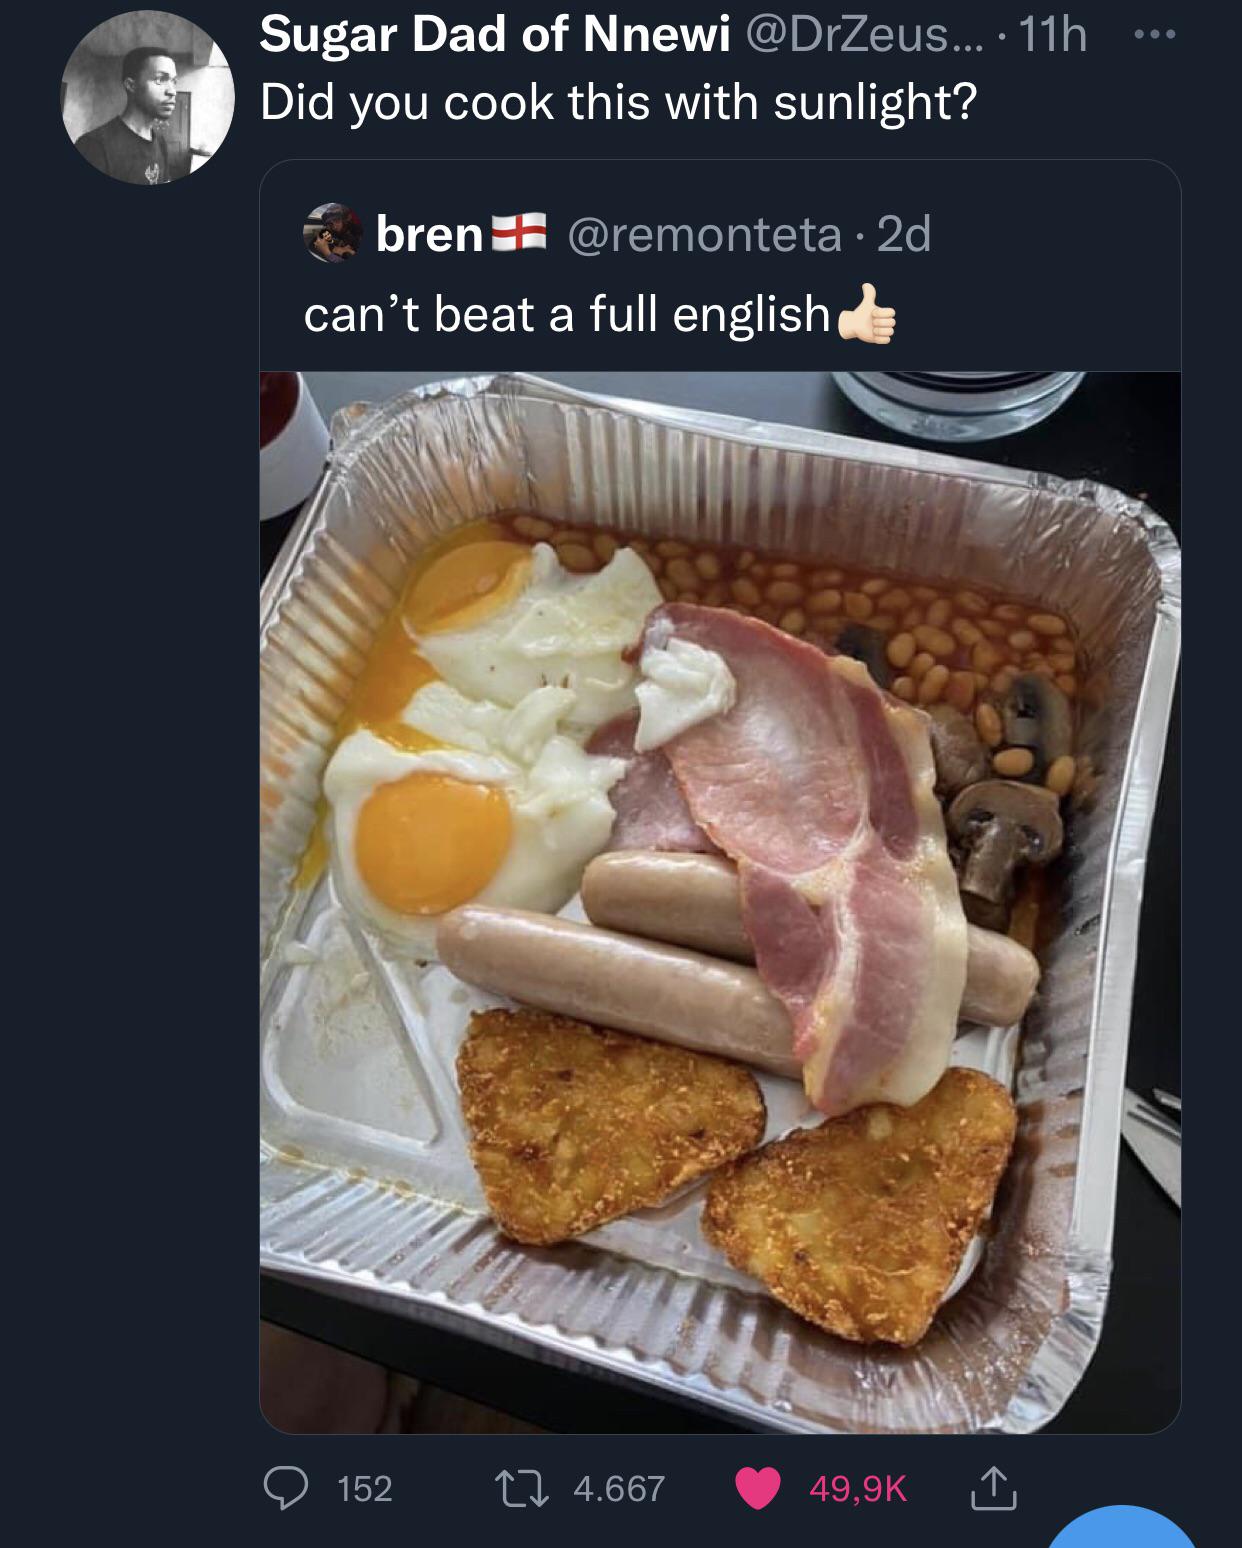 cool random pics - cool pics and memes English breakfast - Sugar Dad of Nnewi .... 11h Did you cook this with sunlight? bren 2d can't beat a full english 152 14.667 Setores